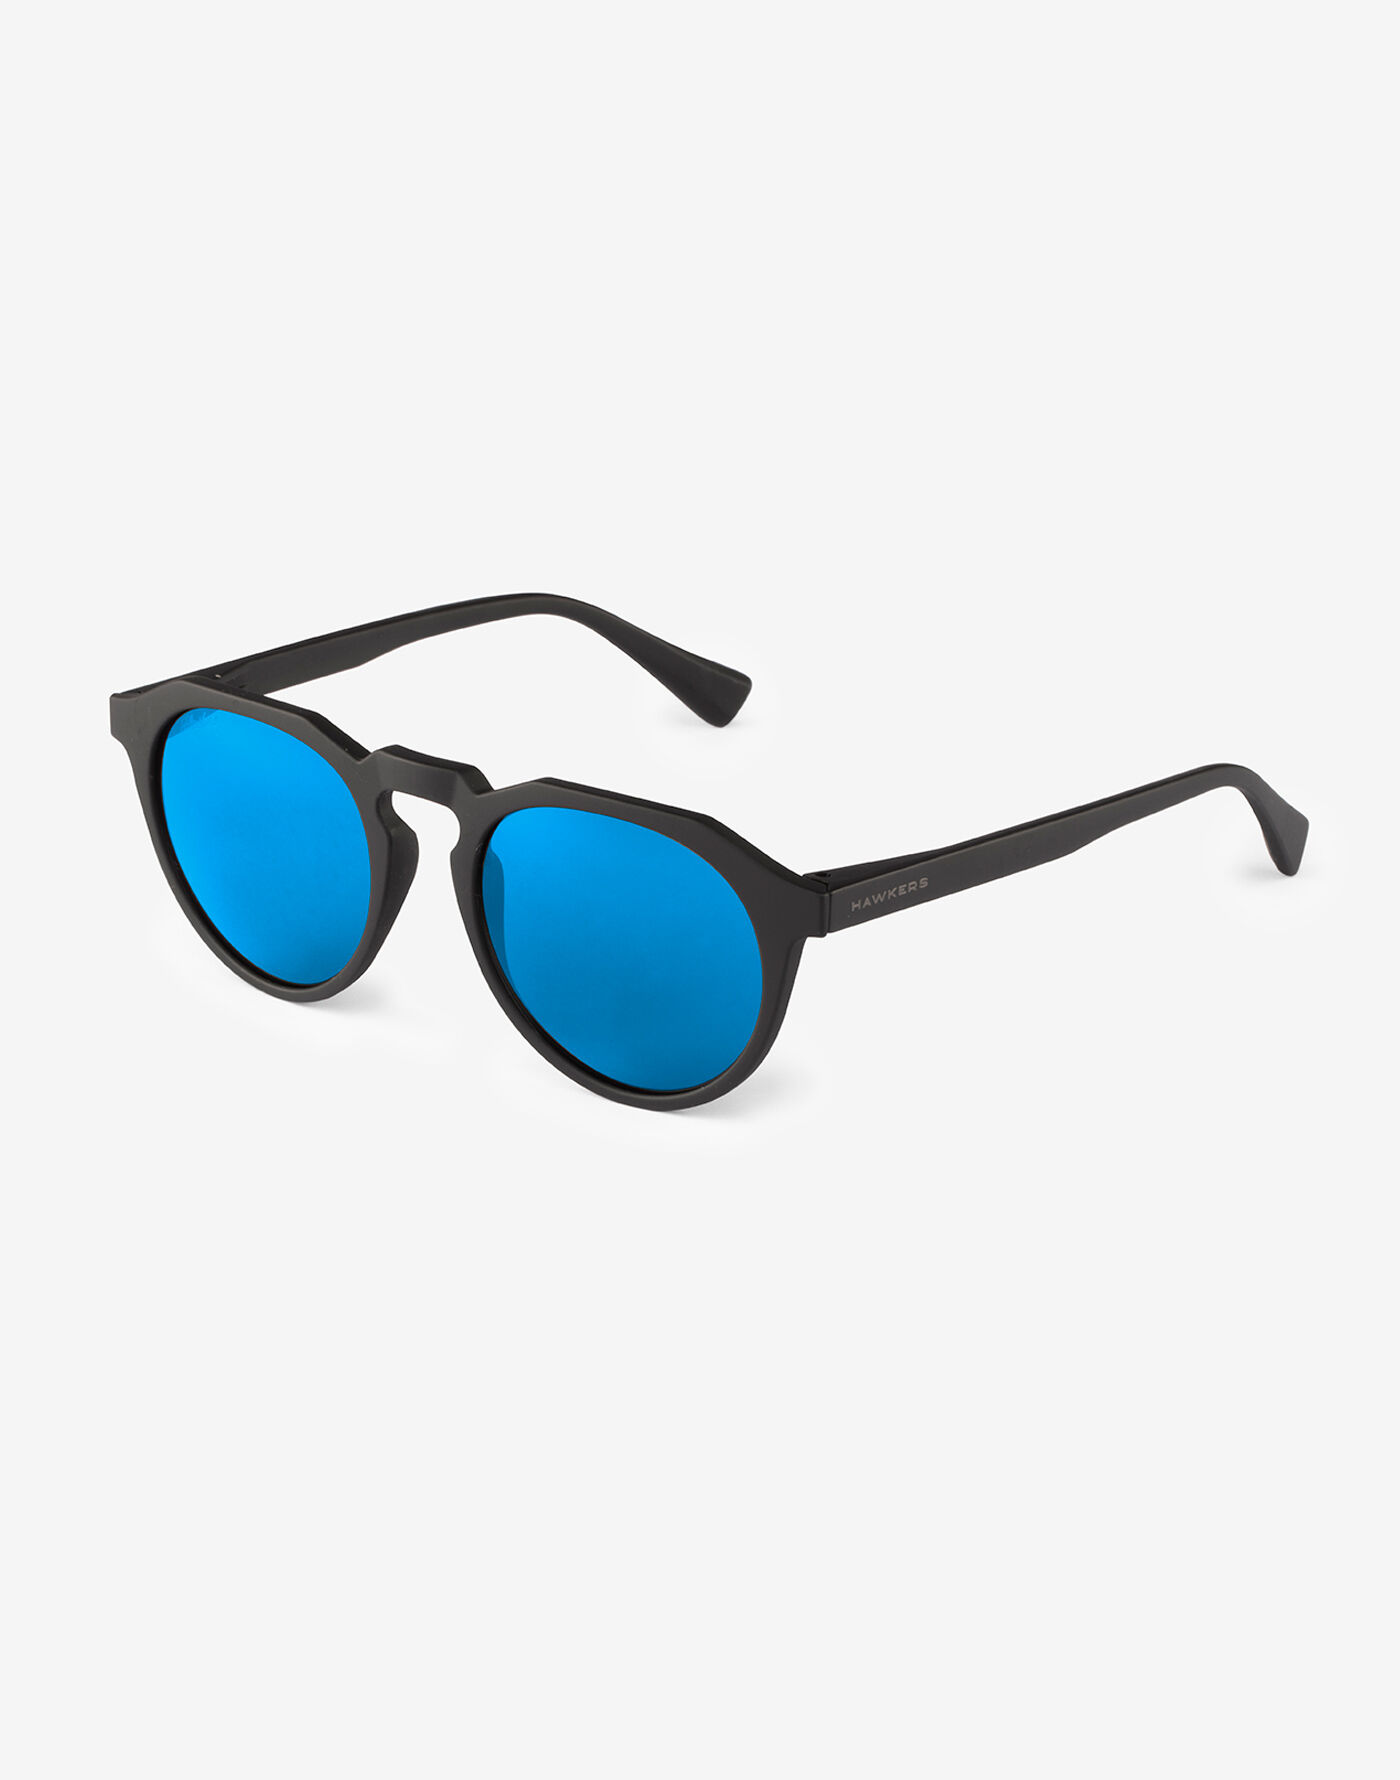 Buy Sunglasses Online | Hawkers USA® Official Store